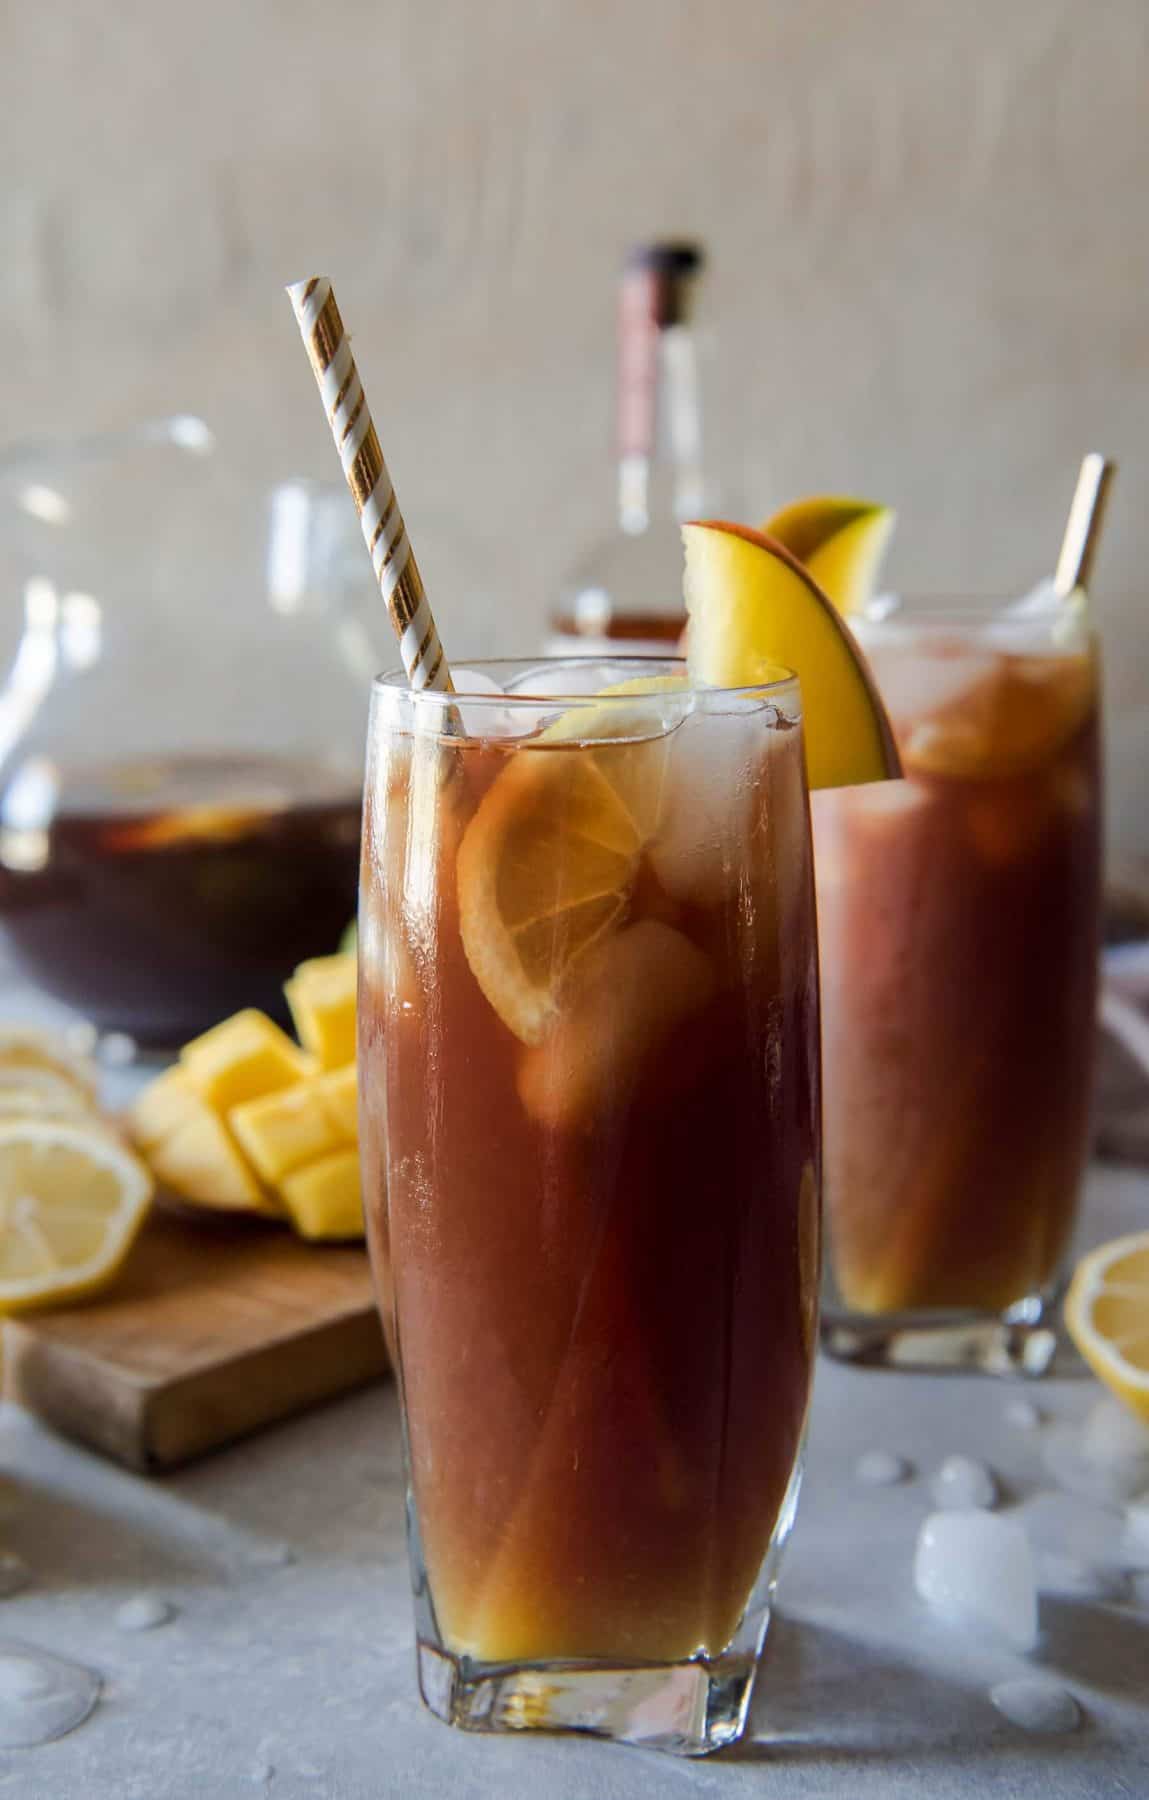 Change up your brunch beverage game with this Southern Spiked Mango Iced Tea! Arnold Palmer-style lemon iced tea combined with homemade mango nectar and a shot of your favorite bourbon is a tasty tropical, Southern way to cool down a balmy morning meal.